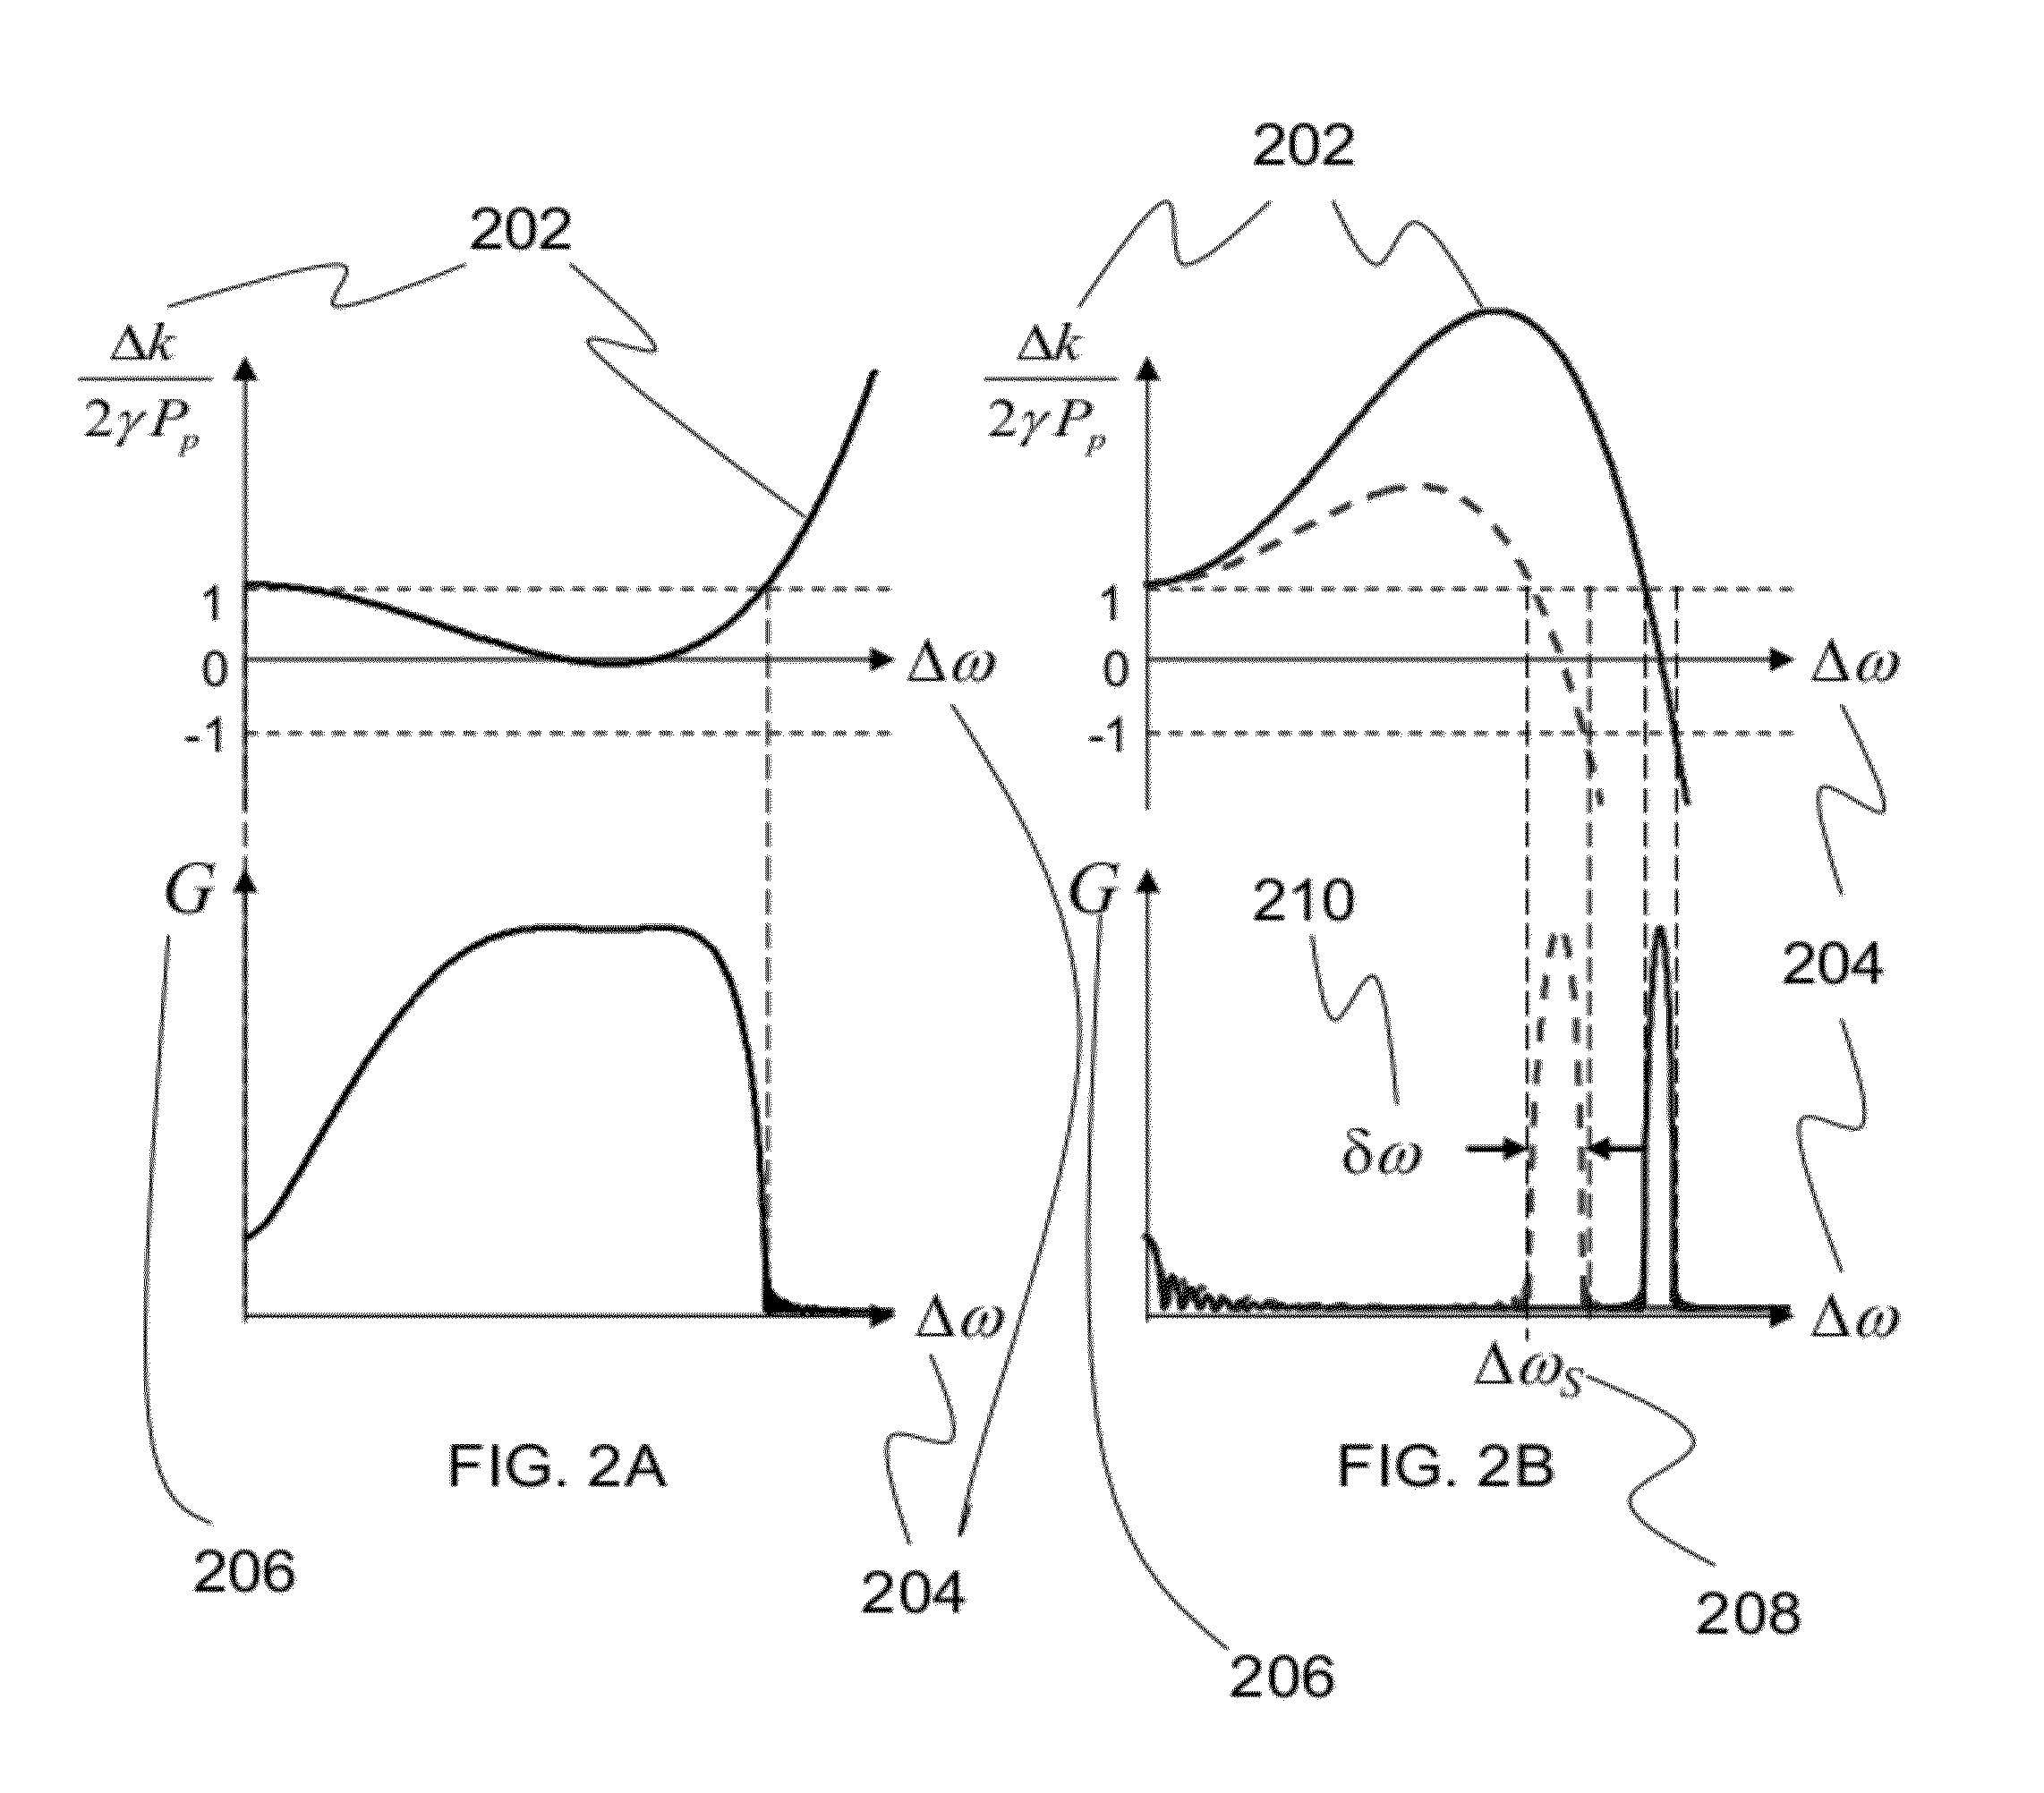 Systems and methods for fiber optic parametric amplification and nonlinear optical fiber for use therein